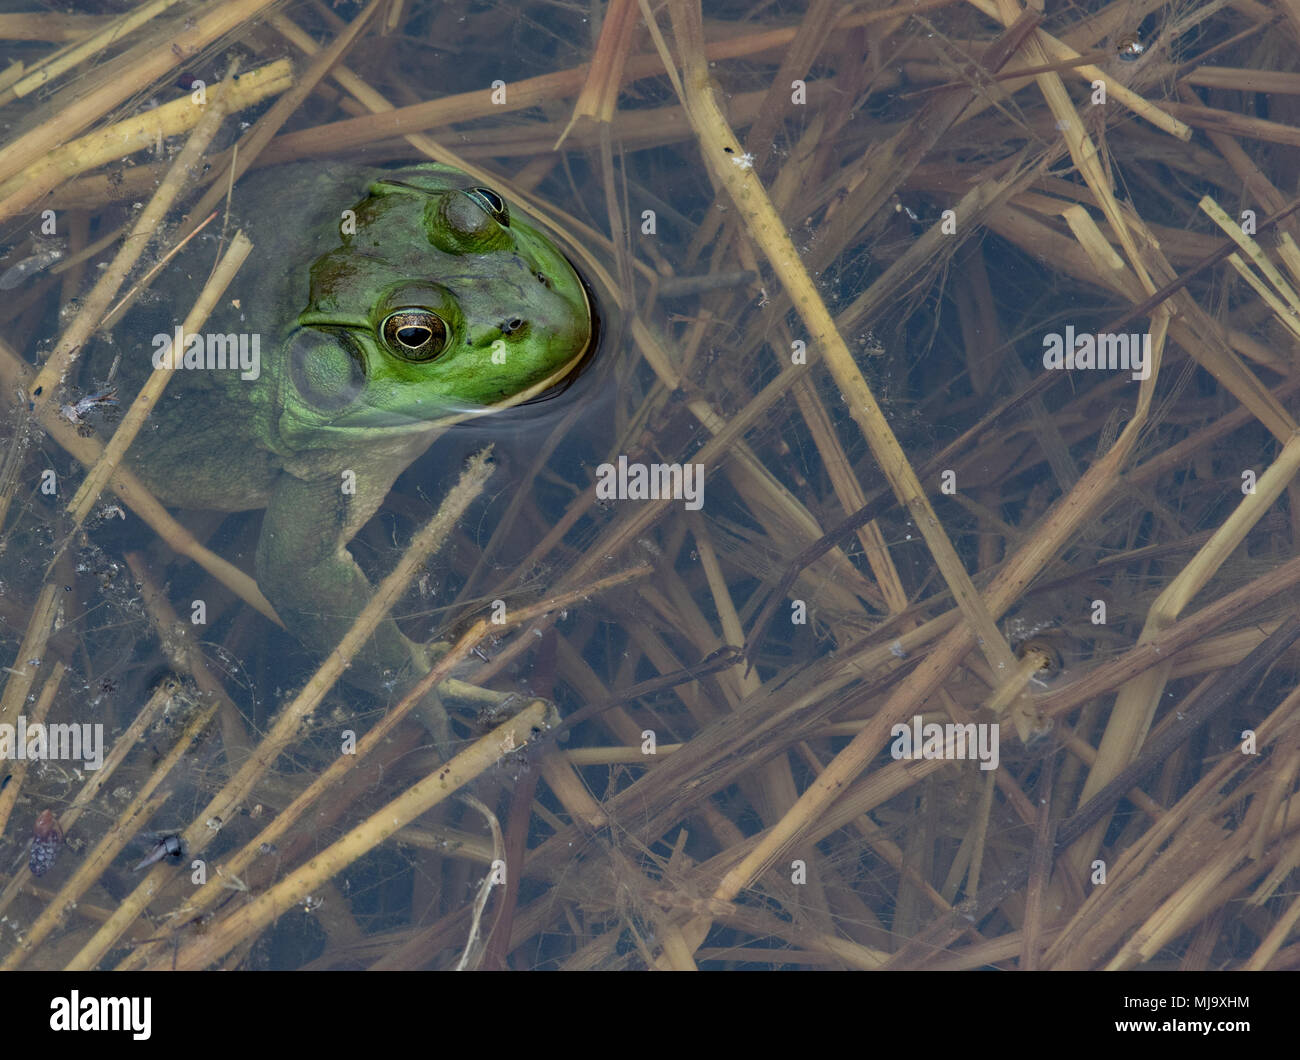 Green American bullfrog coming up for air in a reed-filled pond. Stock Photo